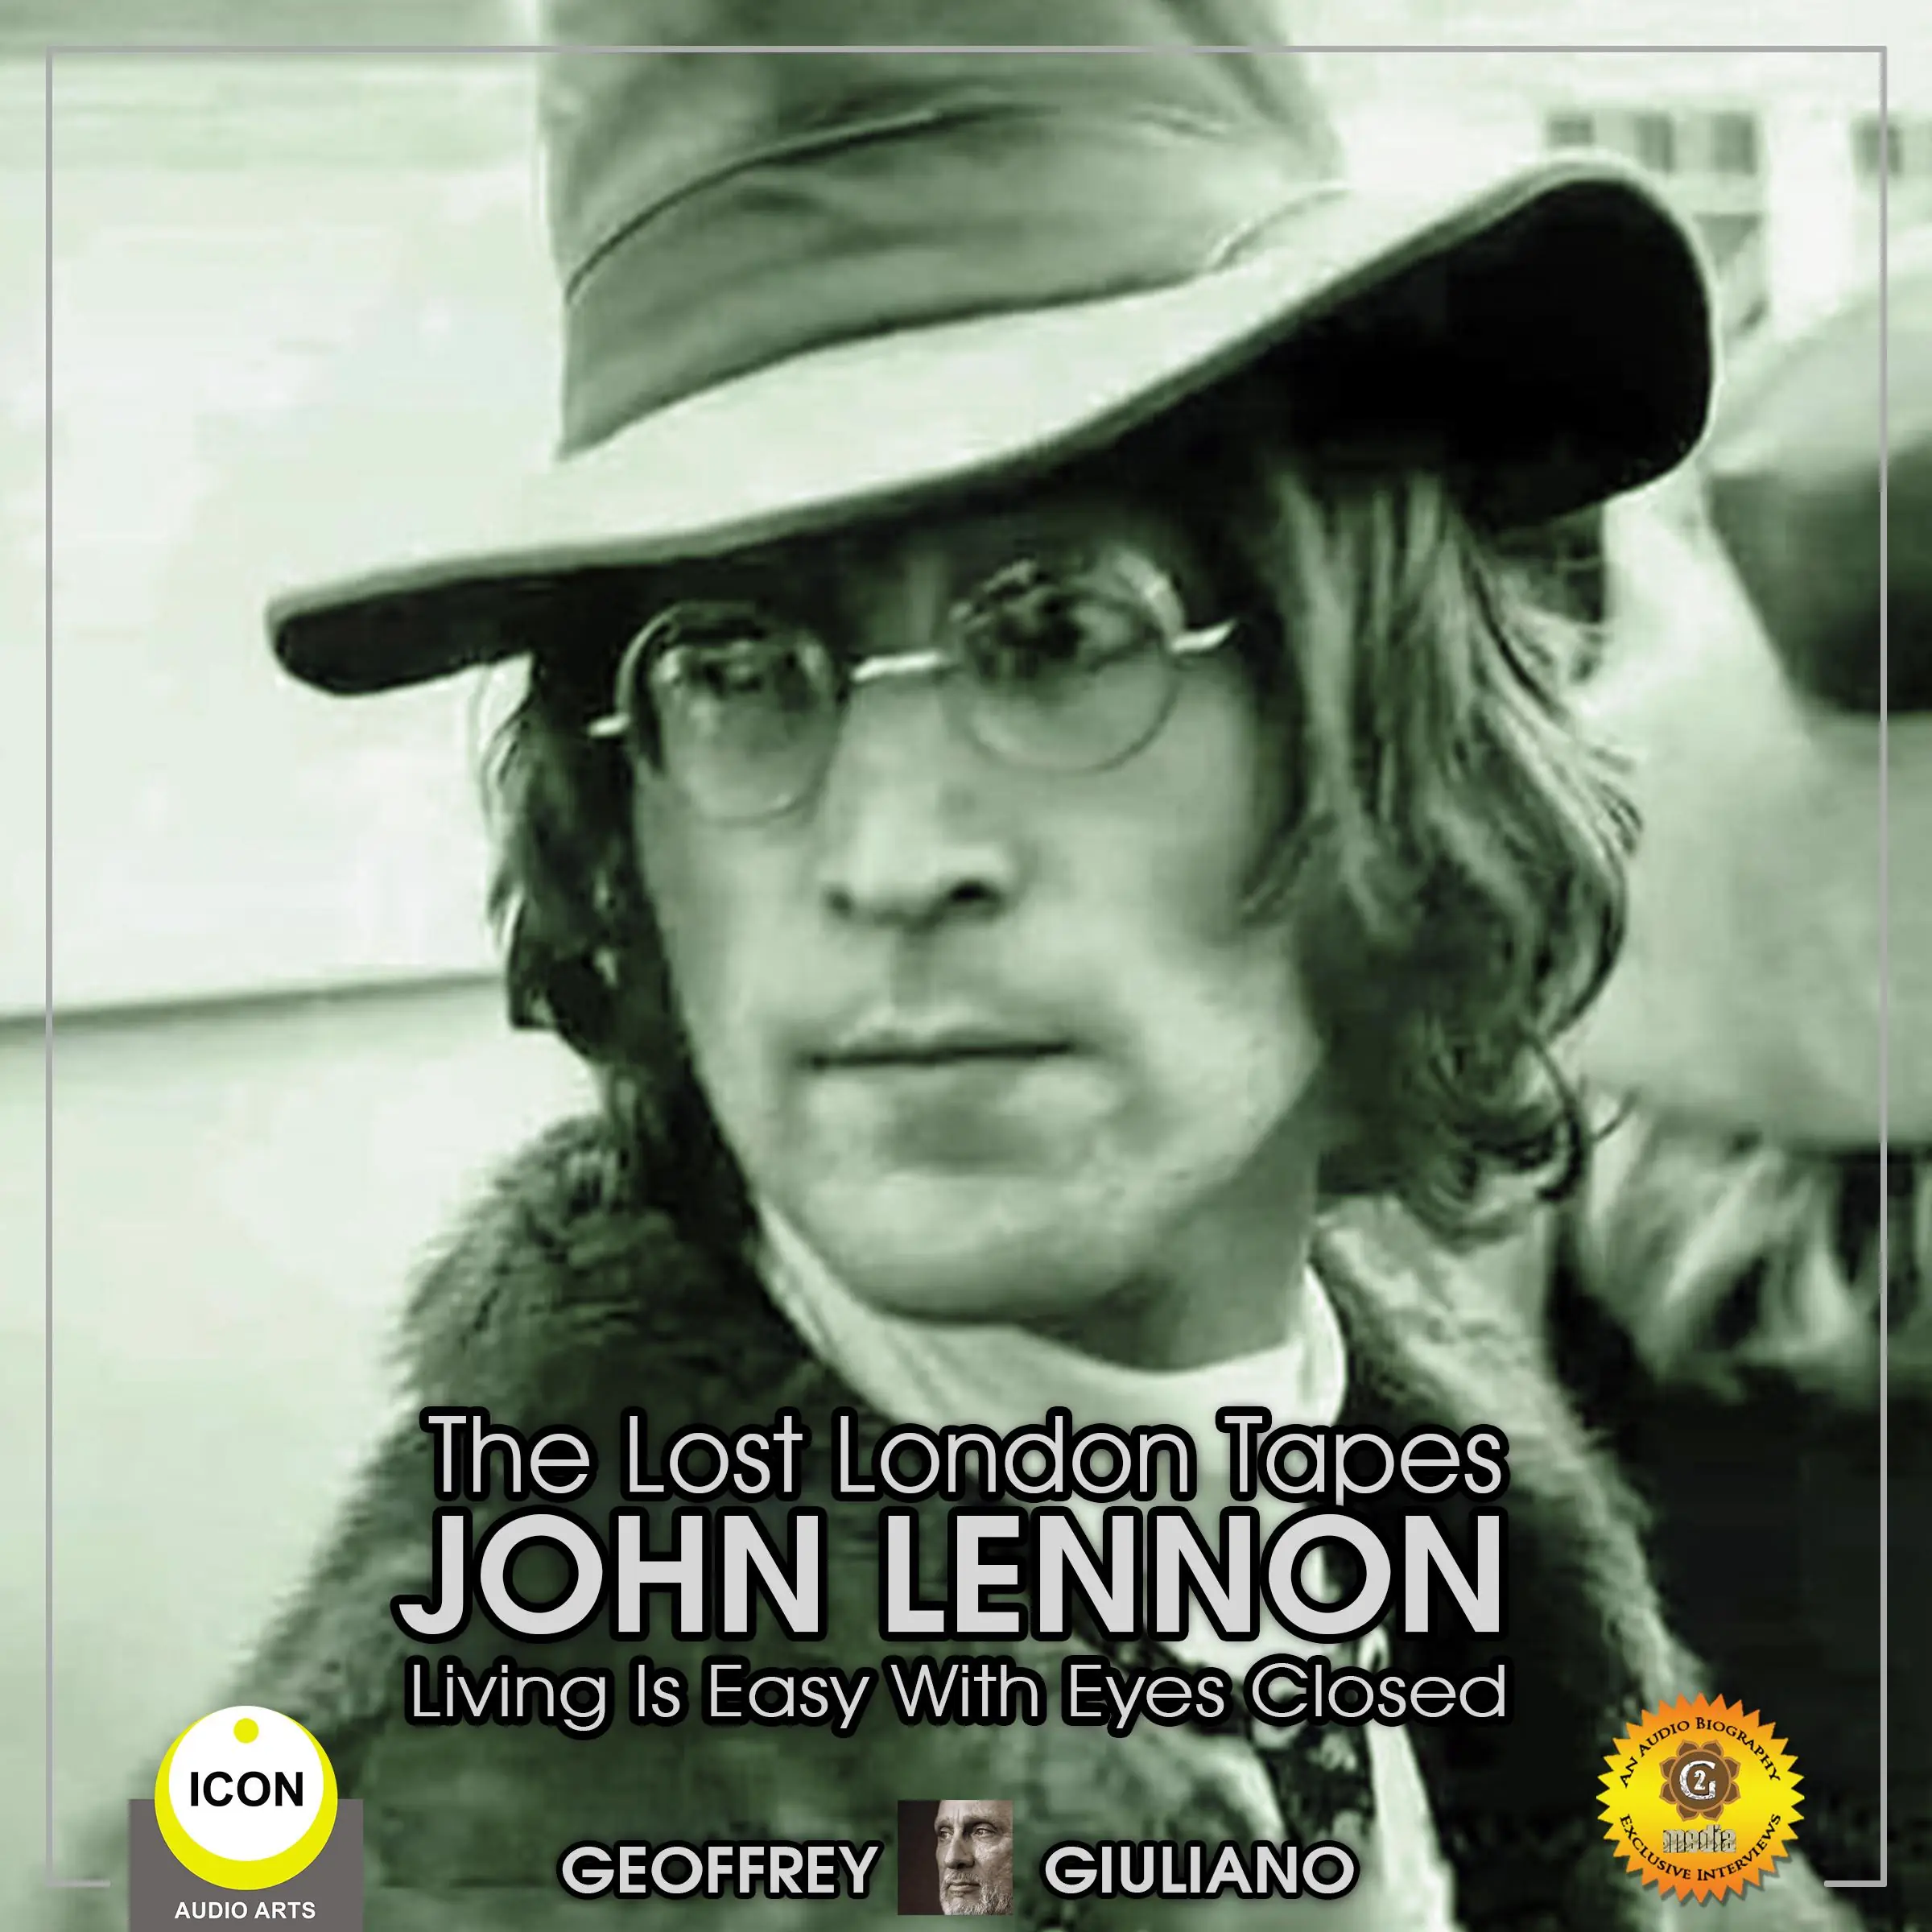 The Lost London Tapes John Lennon - Living Is Easy With Eyes Closed by Geoffrey Giuliano Audiobook